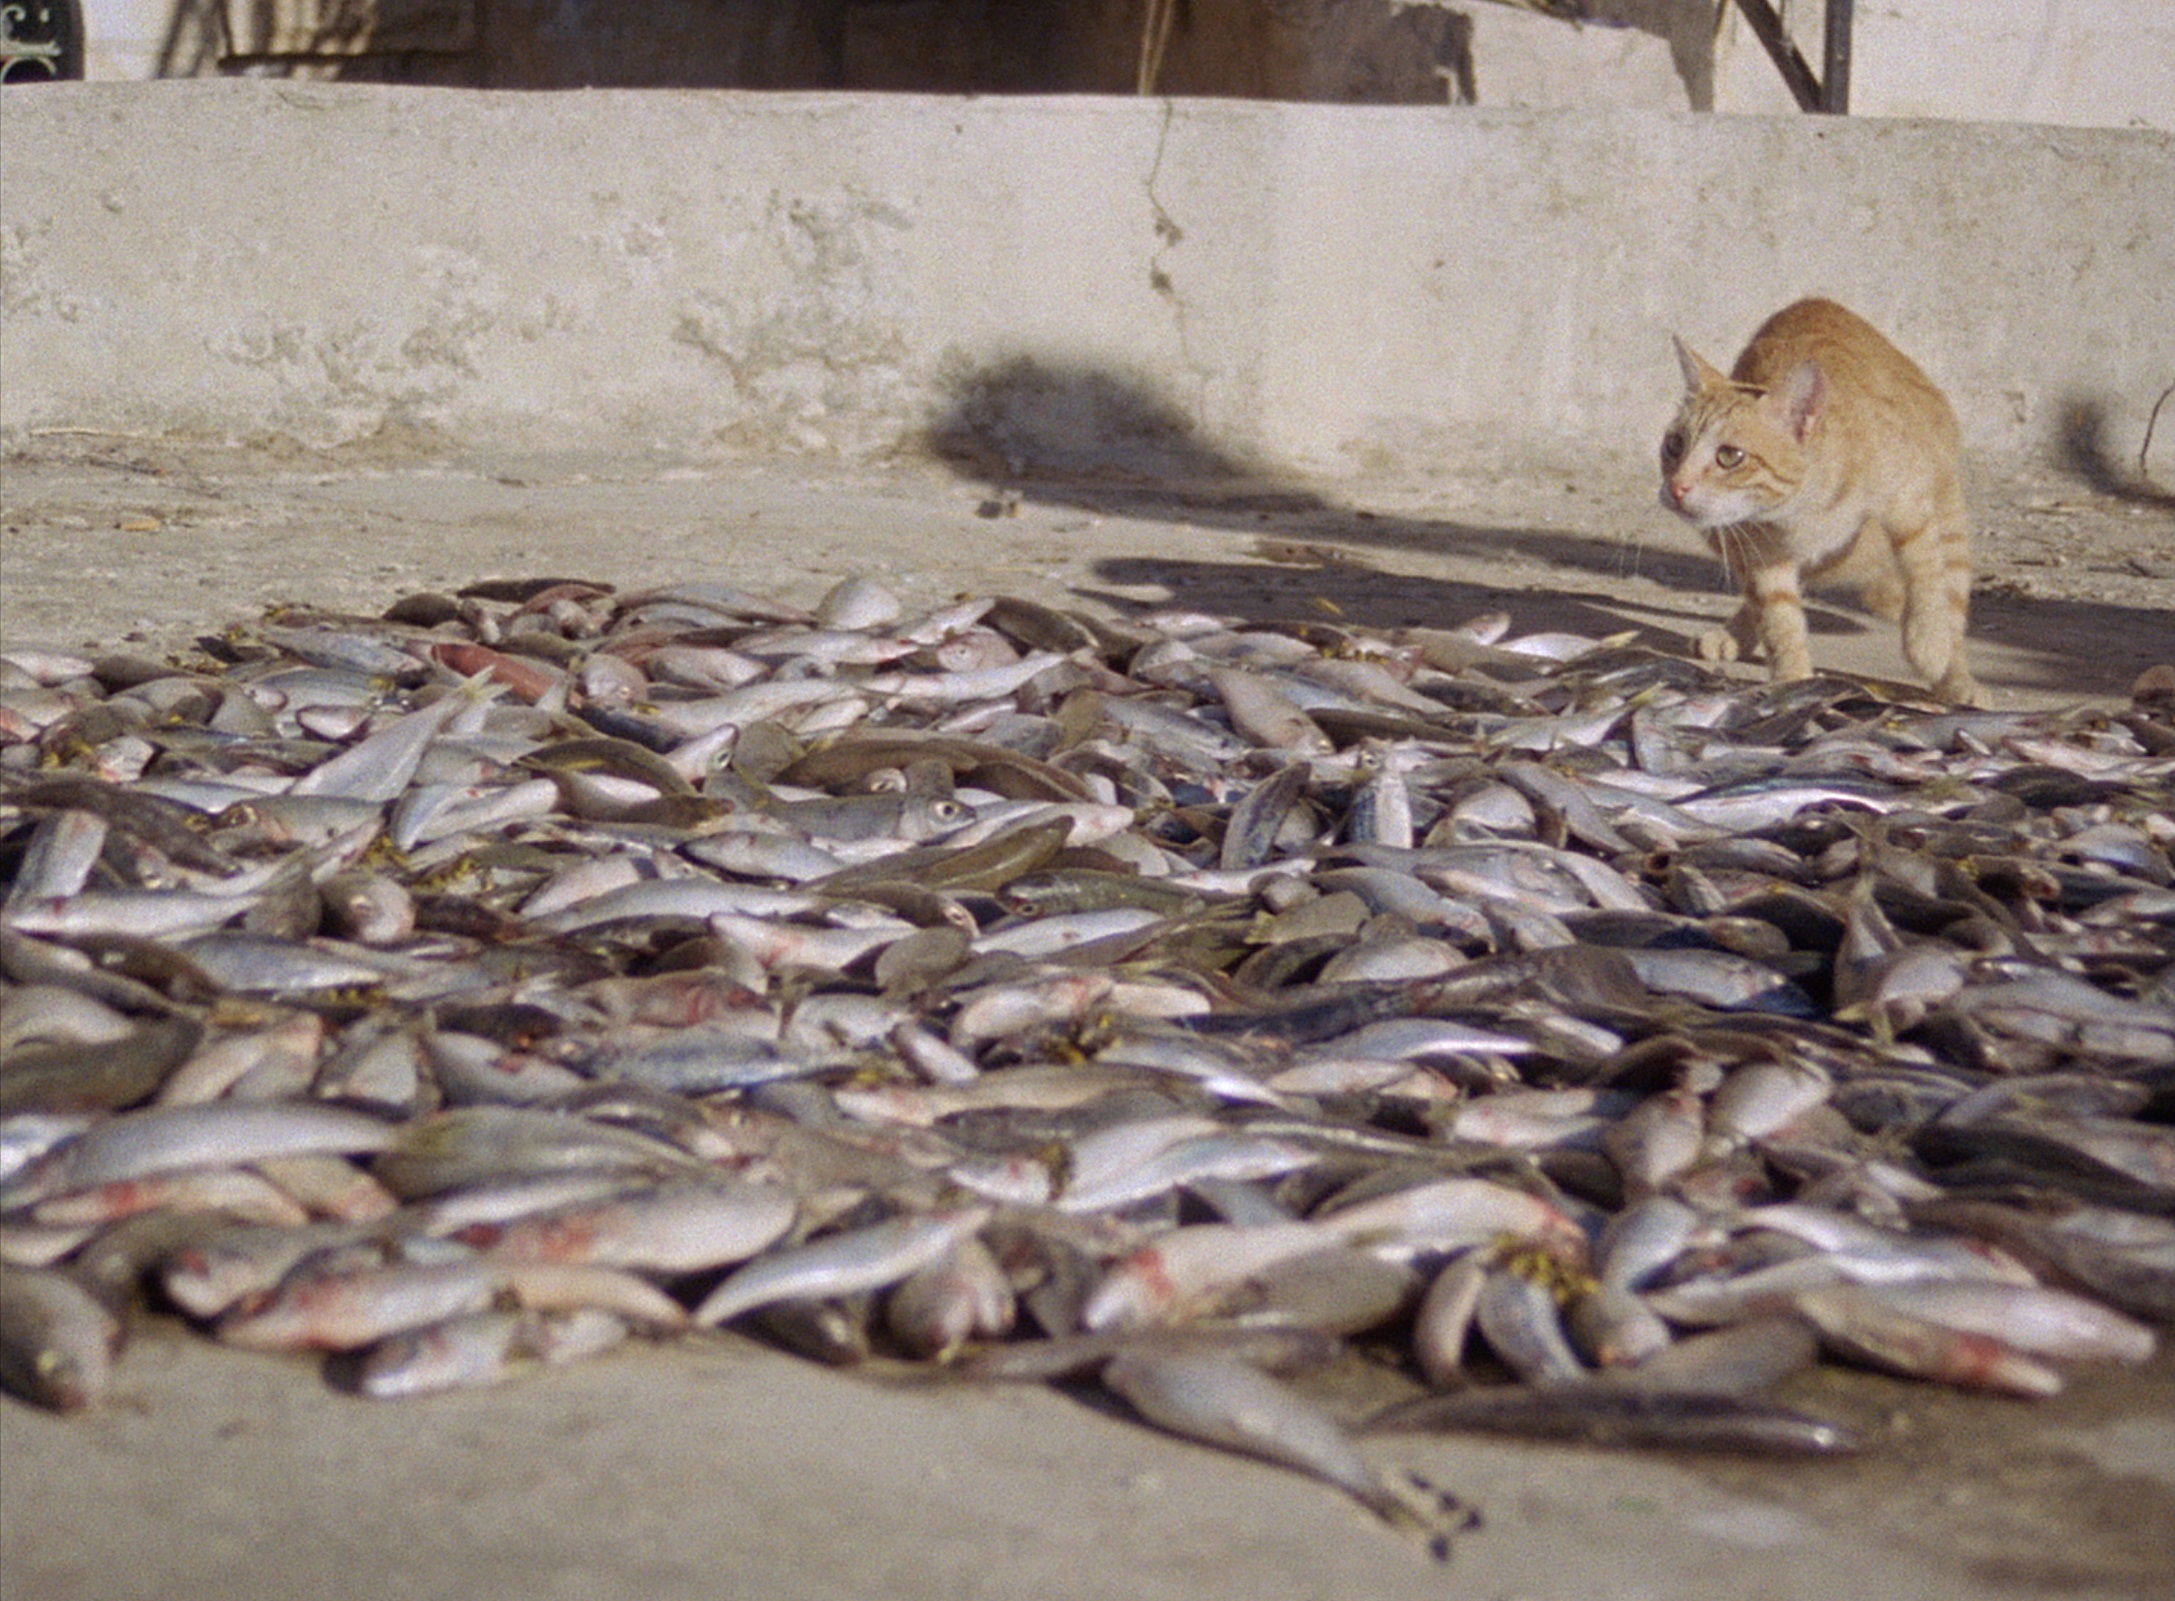 A still from Penelope, with a ginger cat walking across a paved area covered with fish.